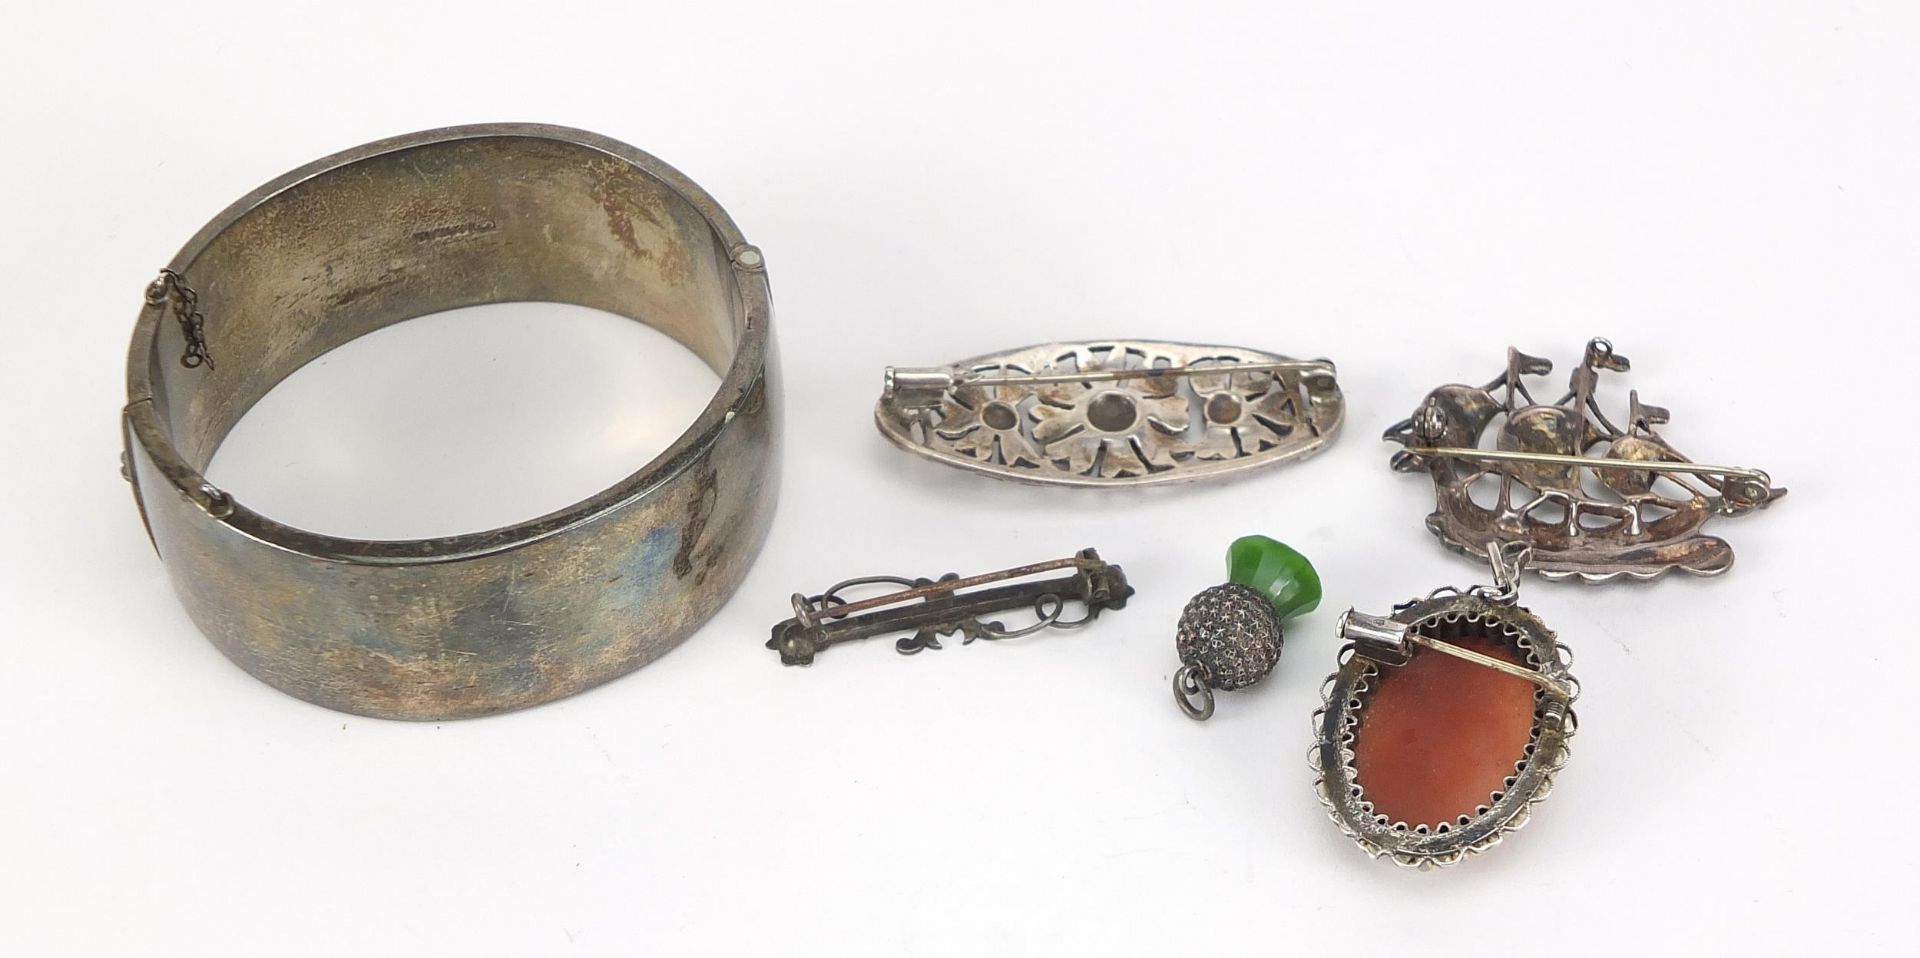 Silver jewellery including a large Victorian style hinged bangle and marcasite brooches, 71.5g - Image 2 of 3